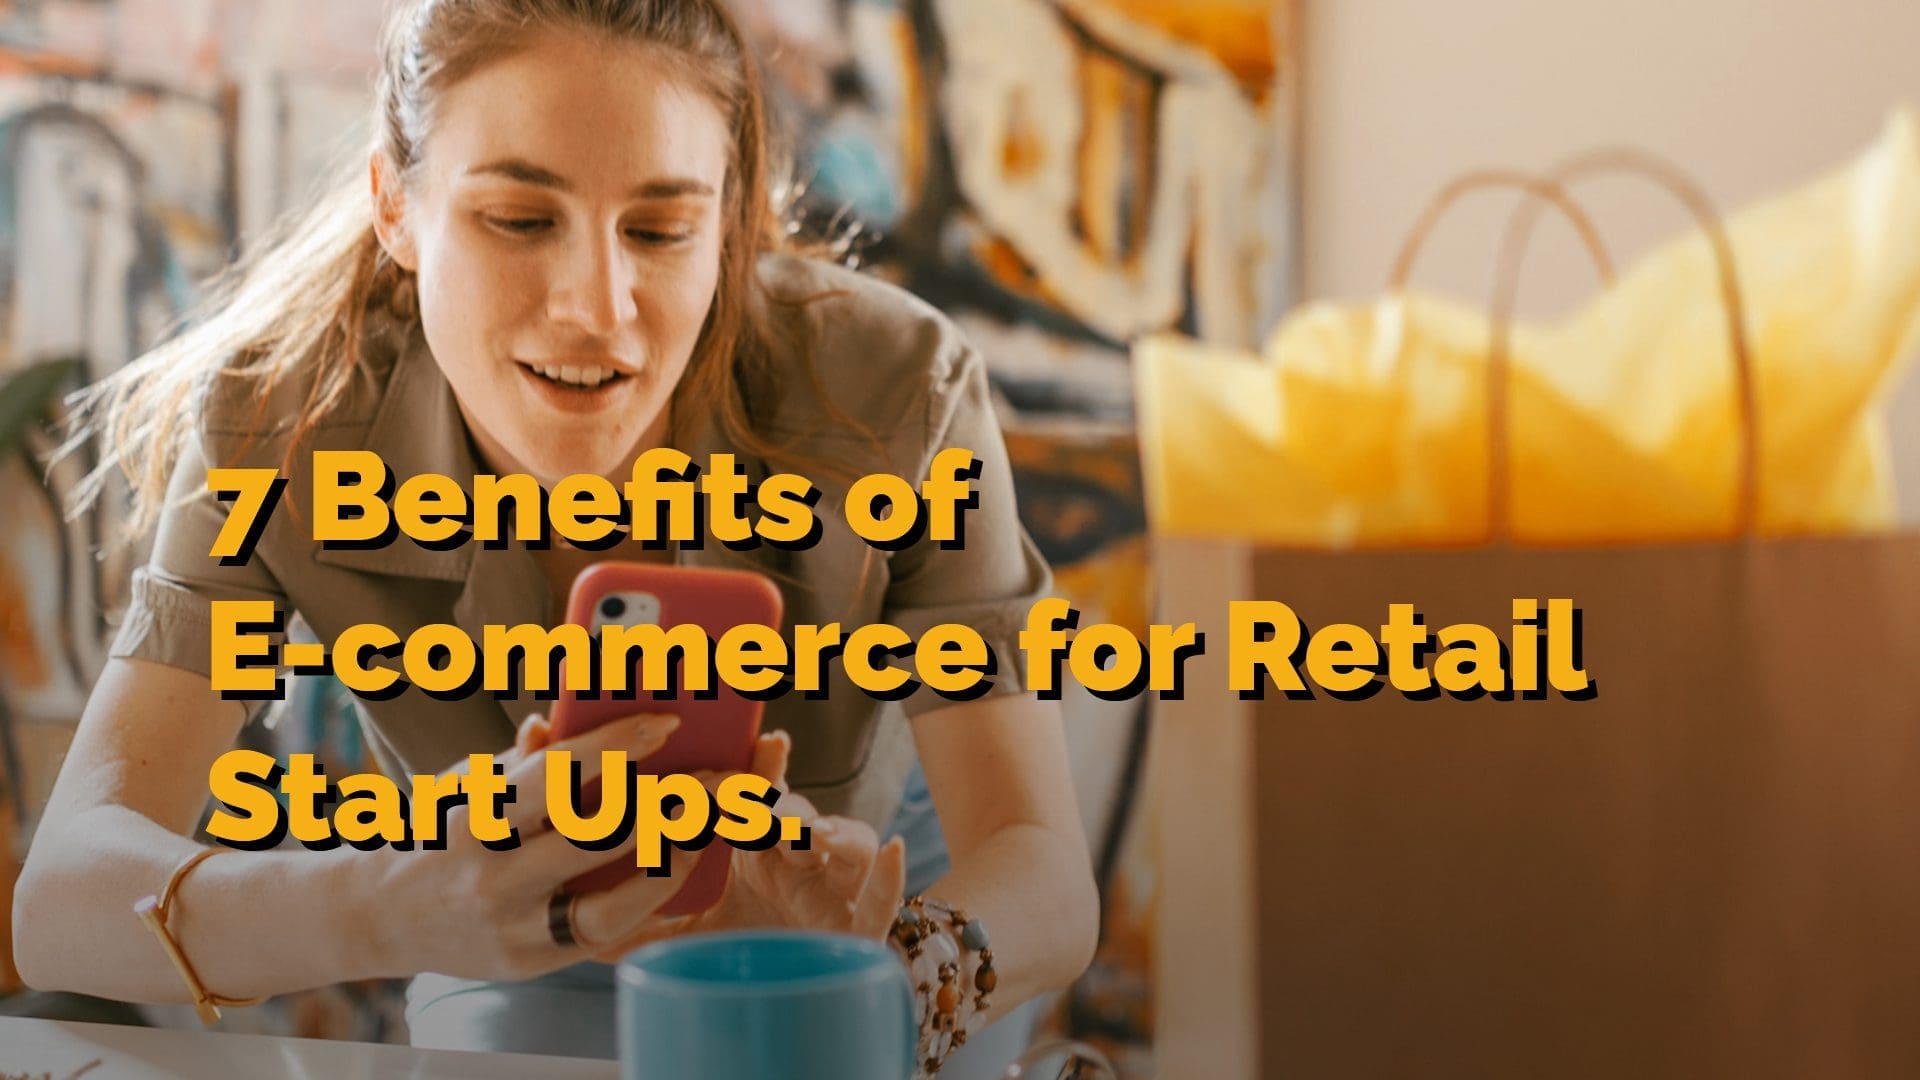 7 Great Benefits of eCommerce for Retail Start-Ups